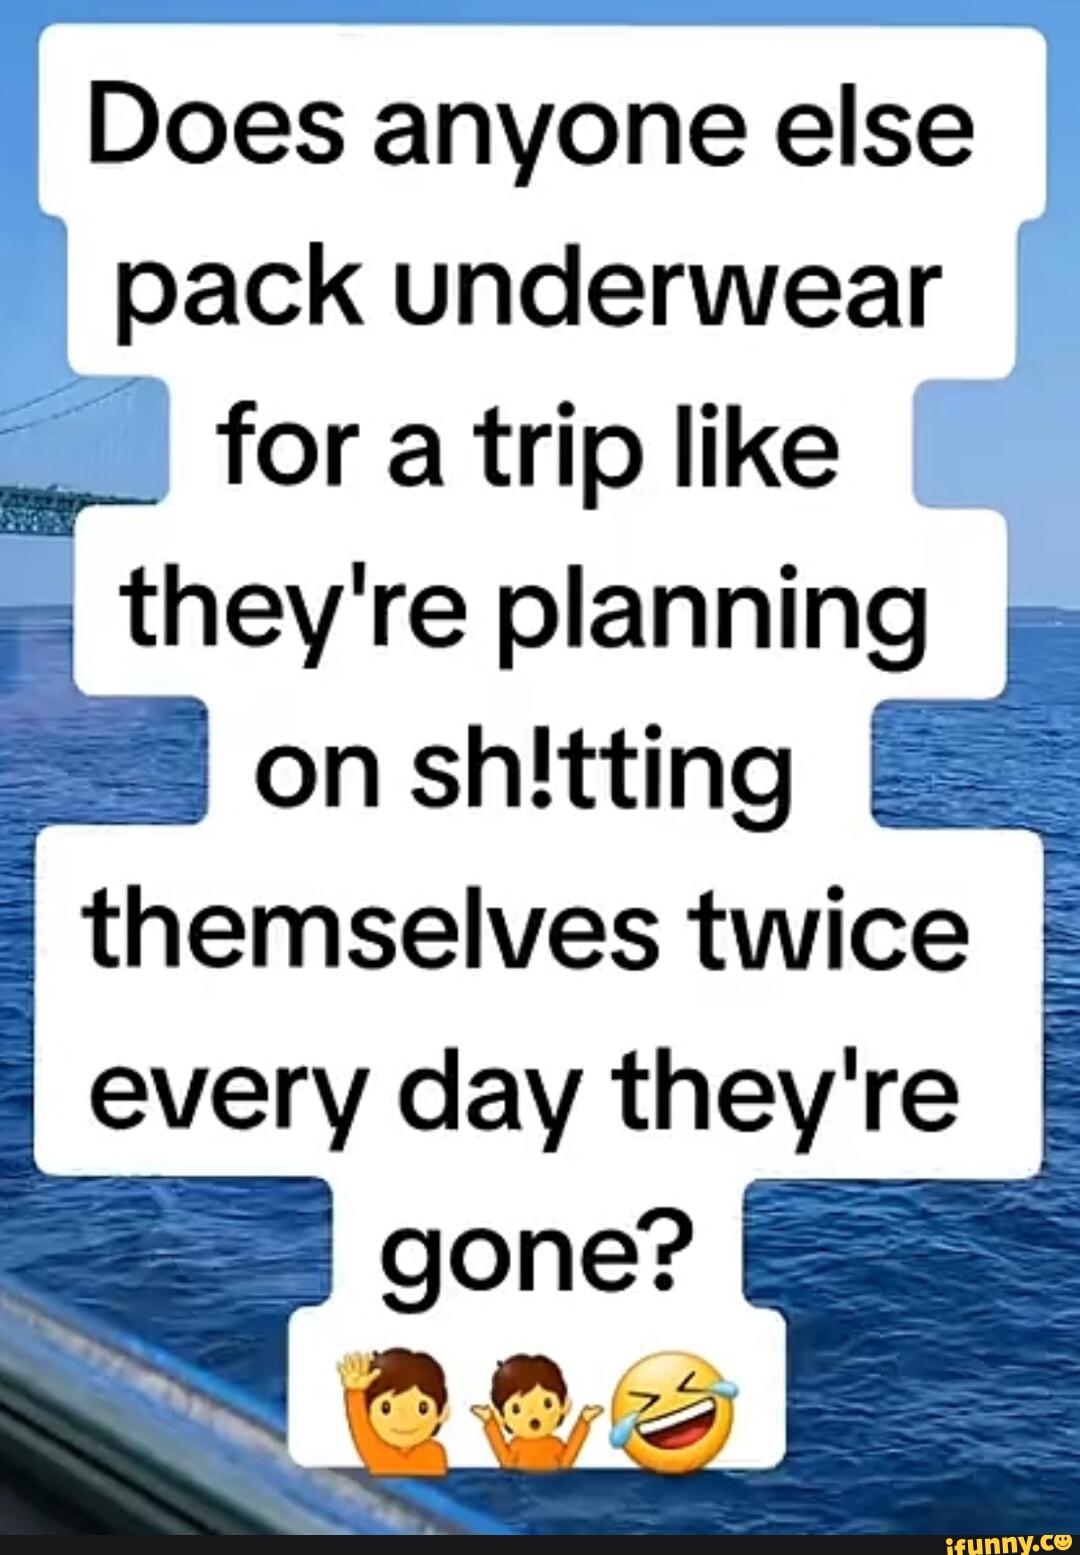 Does anyone else pack underwear for a trip like they're planning on  shitting themselves twice for every day they're gone? - iFunny